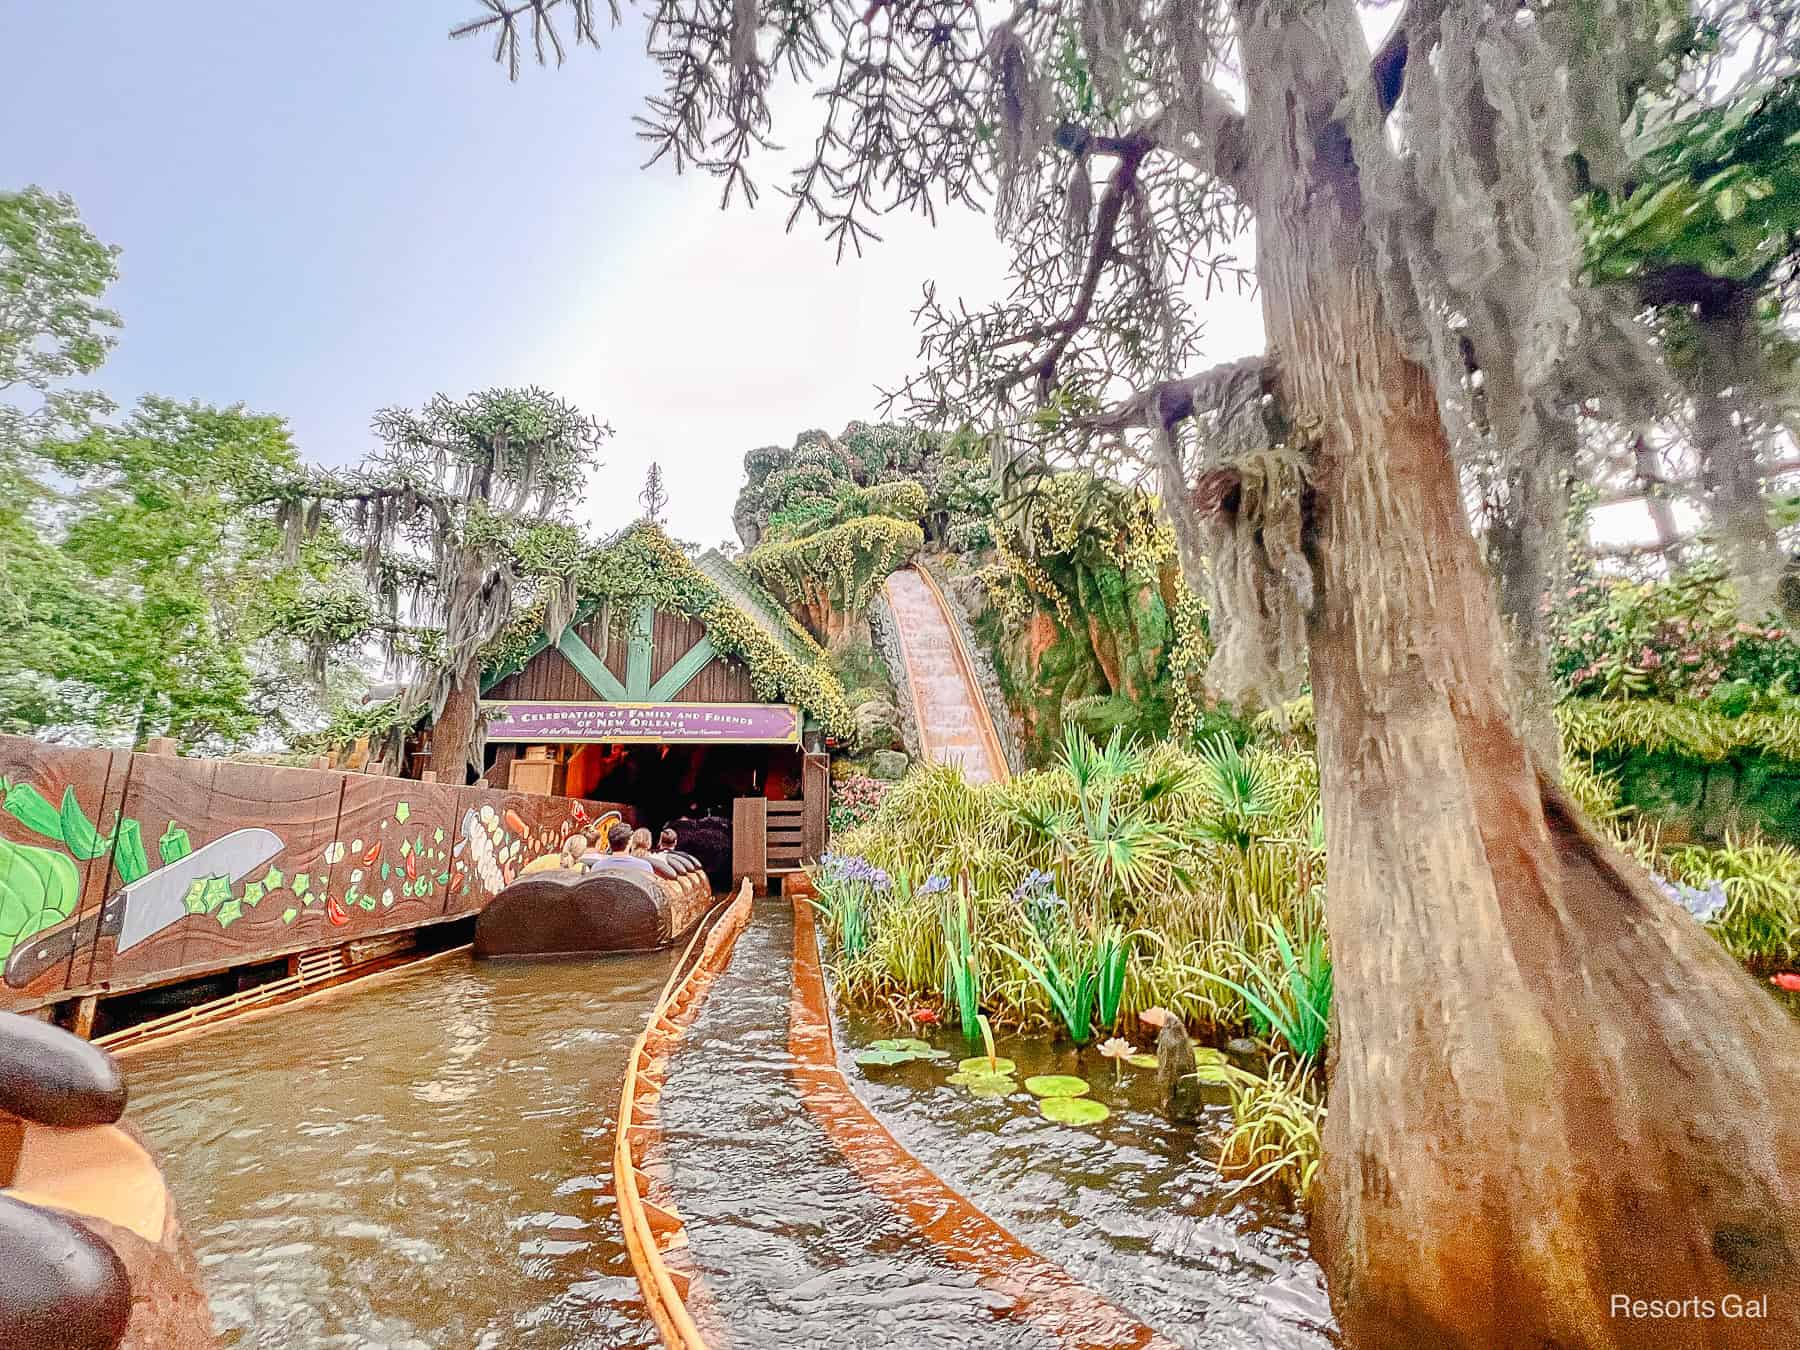 the initial ride where you see guests coming down the flume to your right as you enter the bayou on the logs 